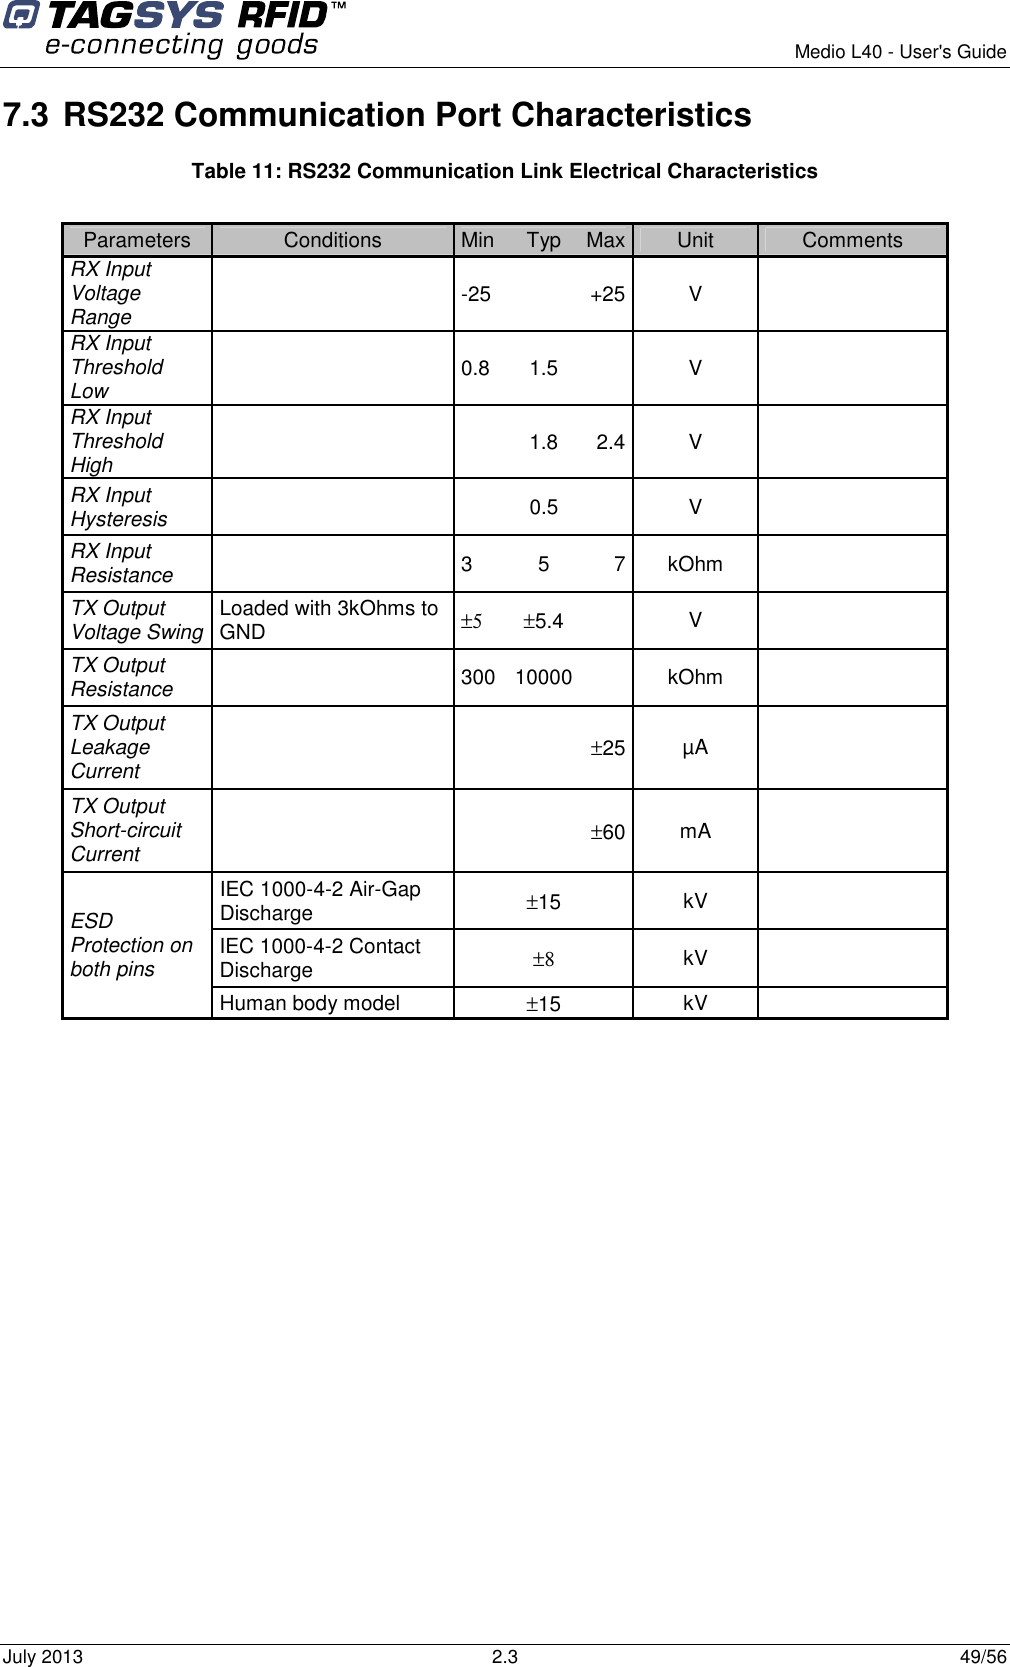        Medio L40 - User&apos;s Guide July 2013  2.3  49/56  7.3 RS232 Communication Port Characteristics Table 11: RS232 Communication Link Electrical Characteristics  Parameters  Conditions  Min  Typ  Max Unit  Comments RX Input Voltage Range     -25    +25 V    RX Input Threshold Low     0.8  1.5  V    RX Input Threshold High       1.8  2.4 V    RX Input Hysteresis       0.5   V    RX Input Resistance     3  5  7 kOhm    TX Output Voltage Swing Loaded with 3kOhms to GND  ±5 ±5.4  V    TX Output Resistance     300  10000  kOhm    TX Output Leakage Current         ±25 µA    TX Output Short-circuit Current         ±60 mA    ESD Protection on both pins IEC 1000-4-2 Air-Gap Discharge   ±15  kV    IEC 1000-4-2 Contact Discharge   ±8 kV    Human body model   ±15  kV     